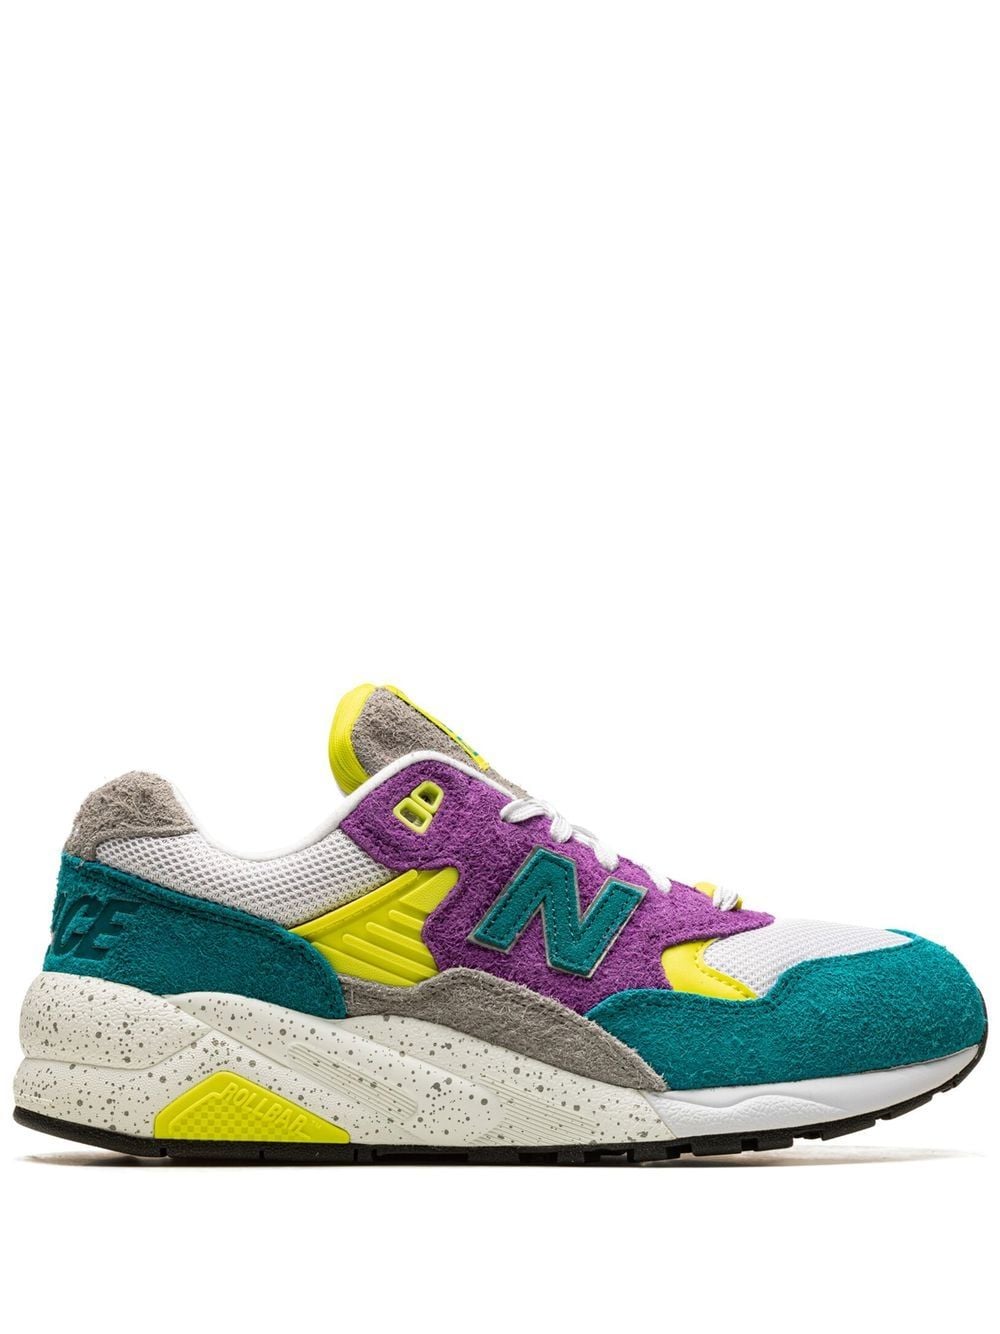 New Balance x PALACE 580 low-top sneakers - Green